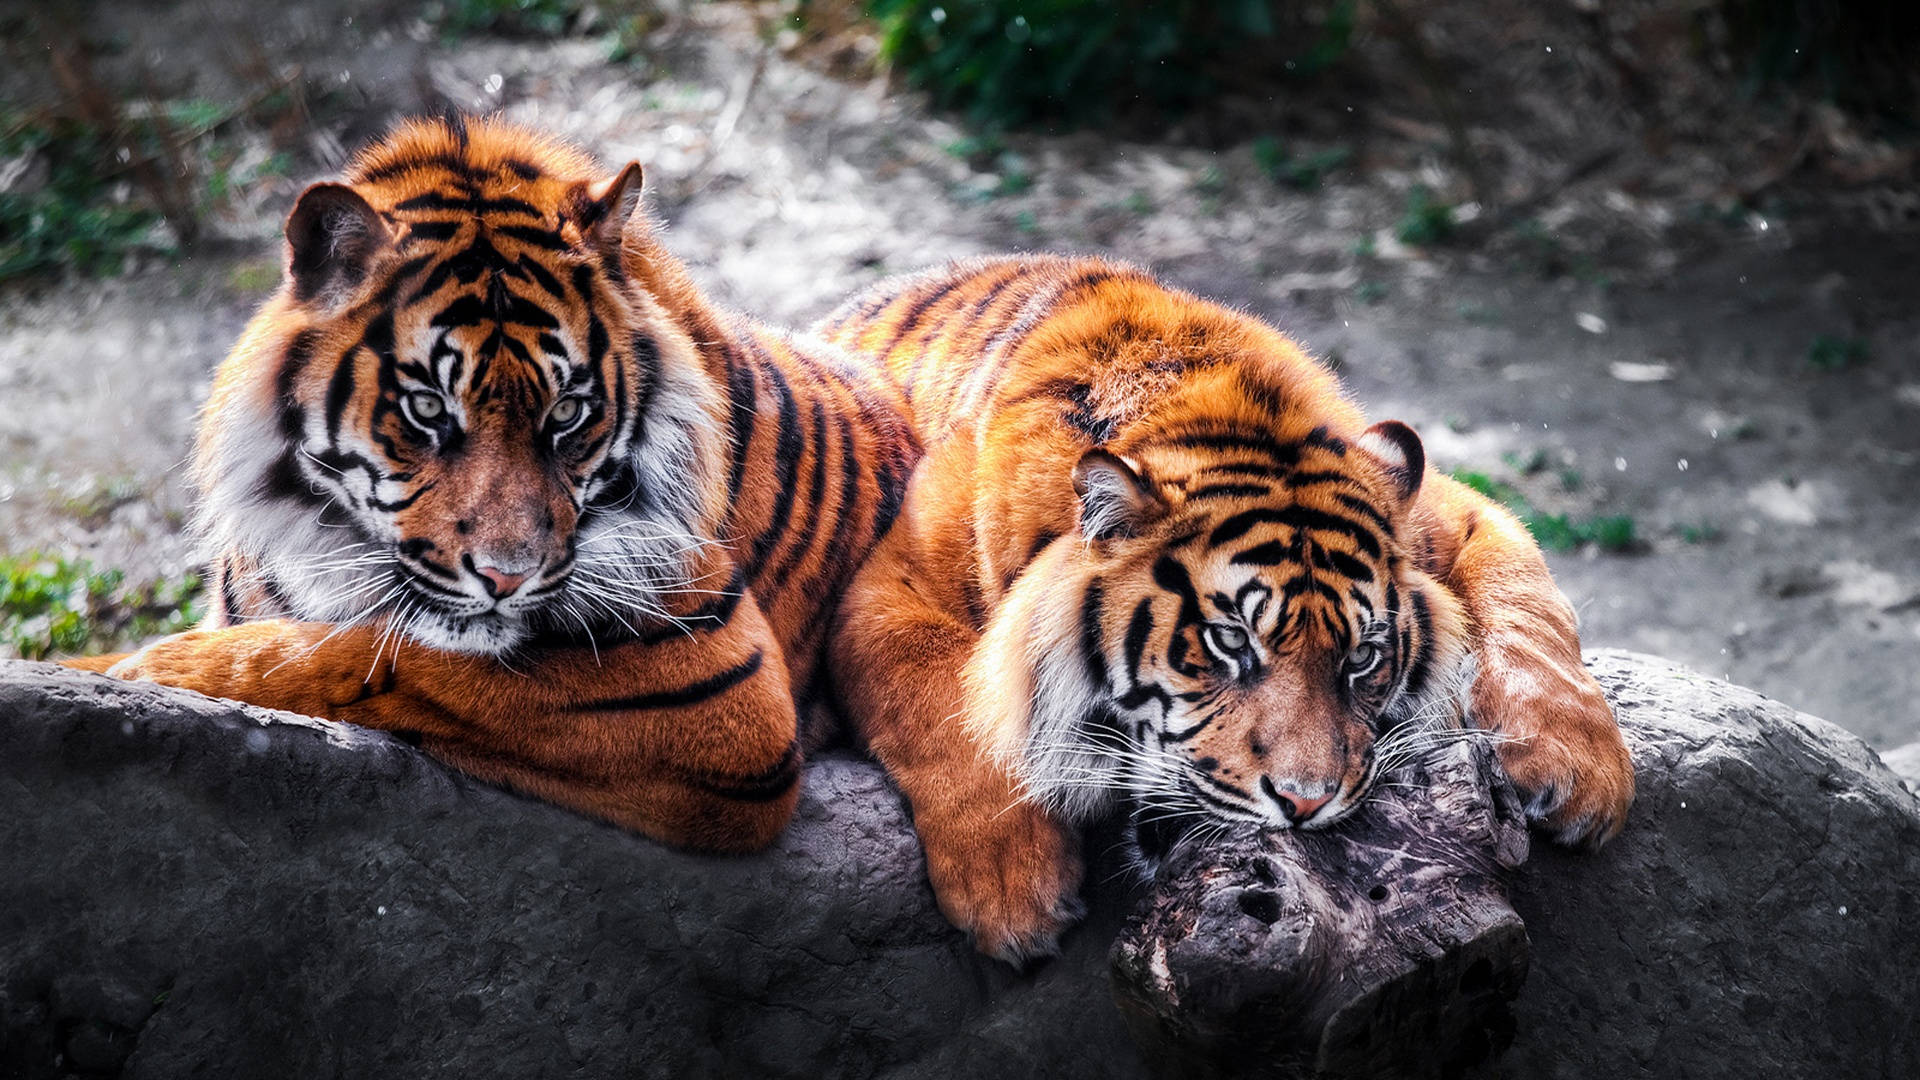 Two Tiger Animals On Damp Rock